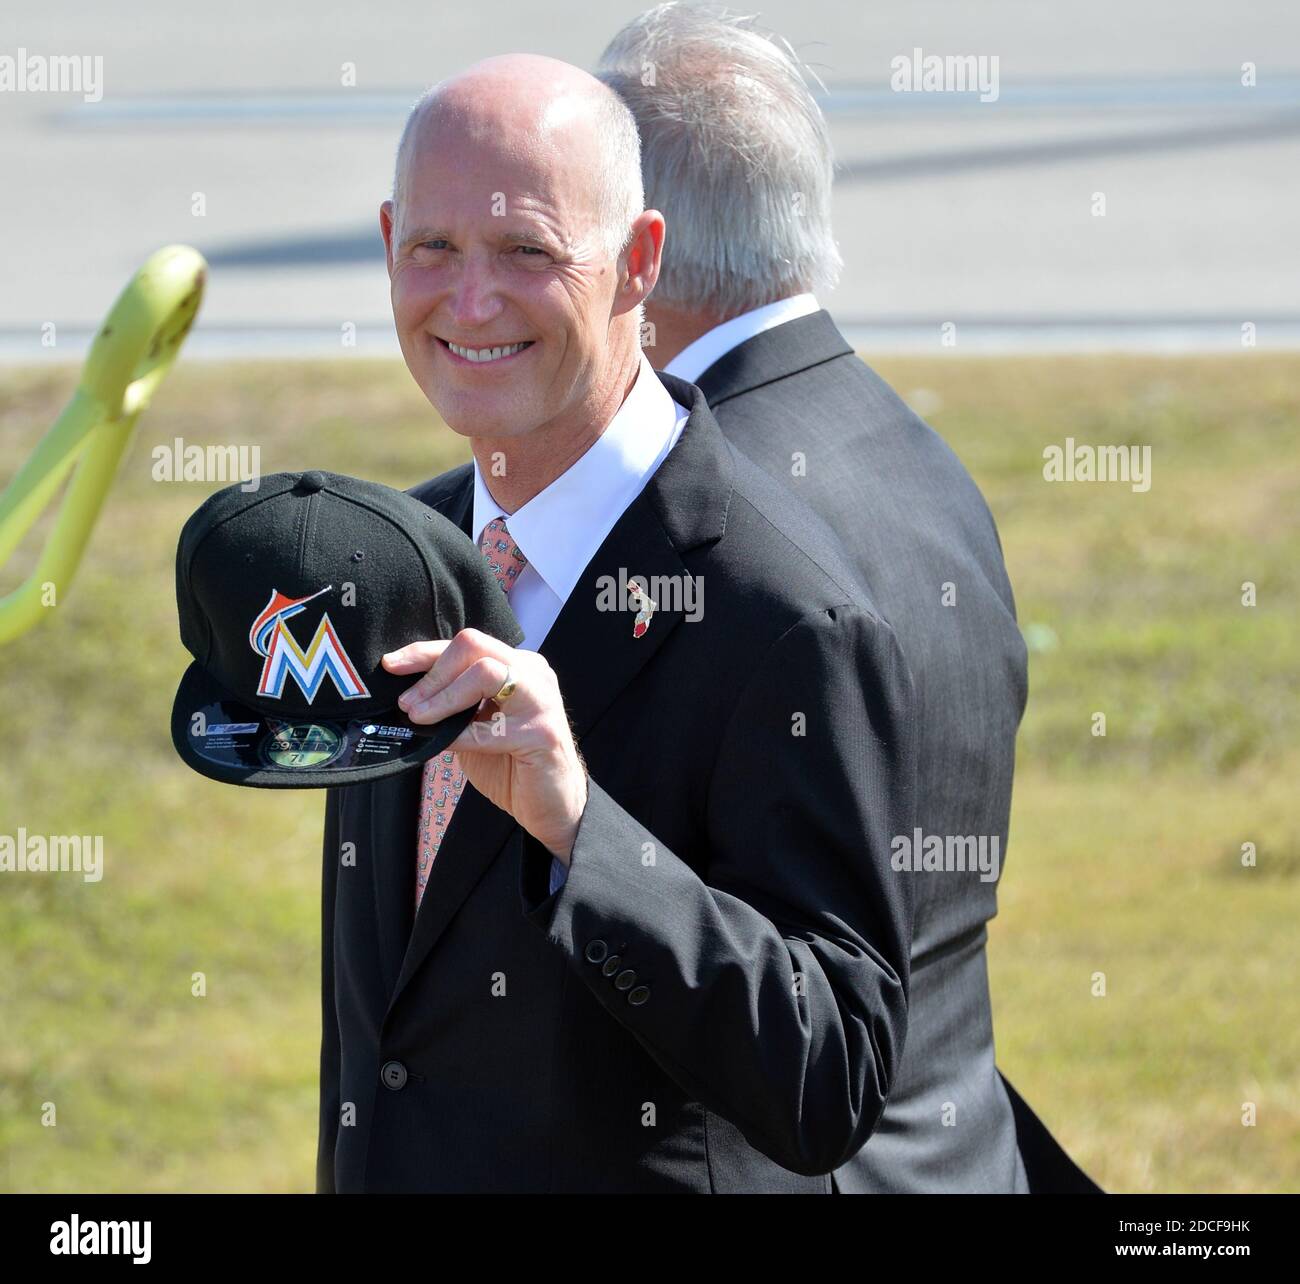 MIAMI, FL - FEBRUARY 25: Florida Governor Rick Scott greets U.S. President Barack Obama on Air Force One with a Florida Marlins cap at Miami International Airport on February 25, 2015 in Miami, Florida  People:  Florida Governor Rick Scott Credit: Hoo-me / MediaPunch Stock Photo